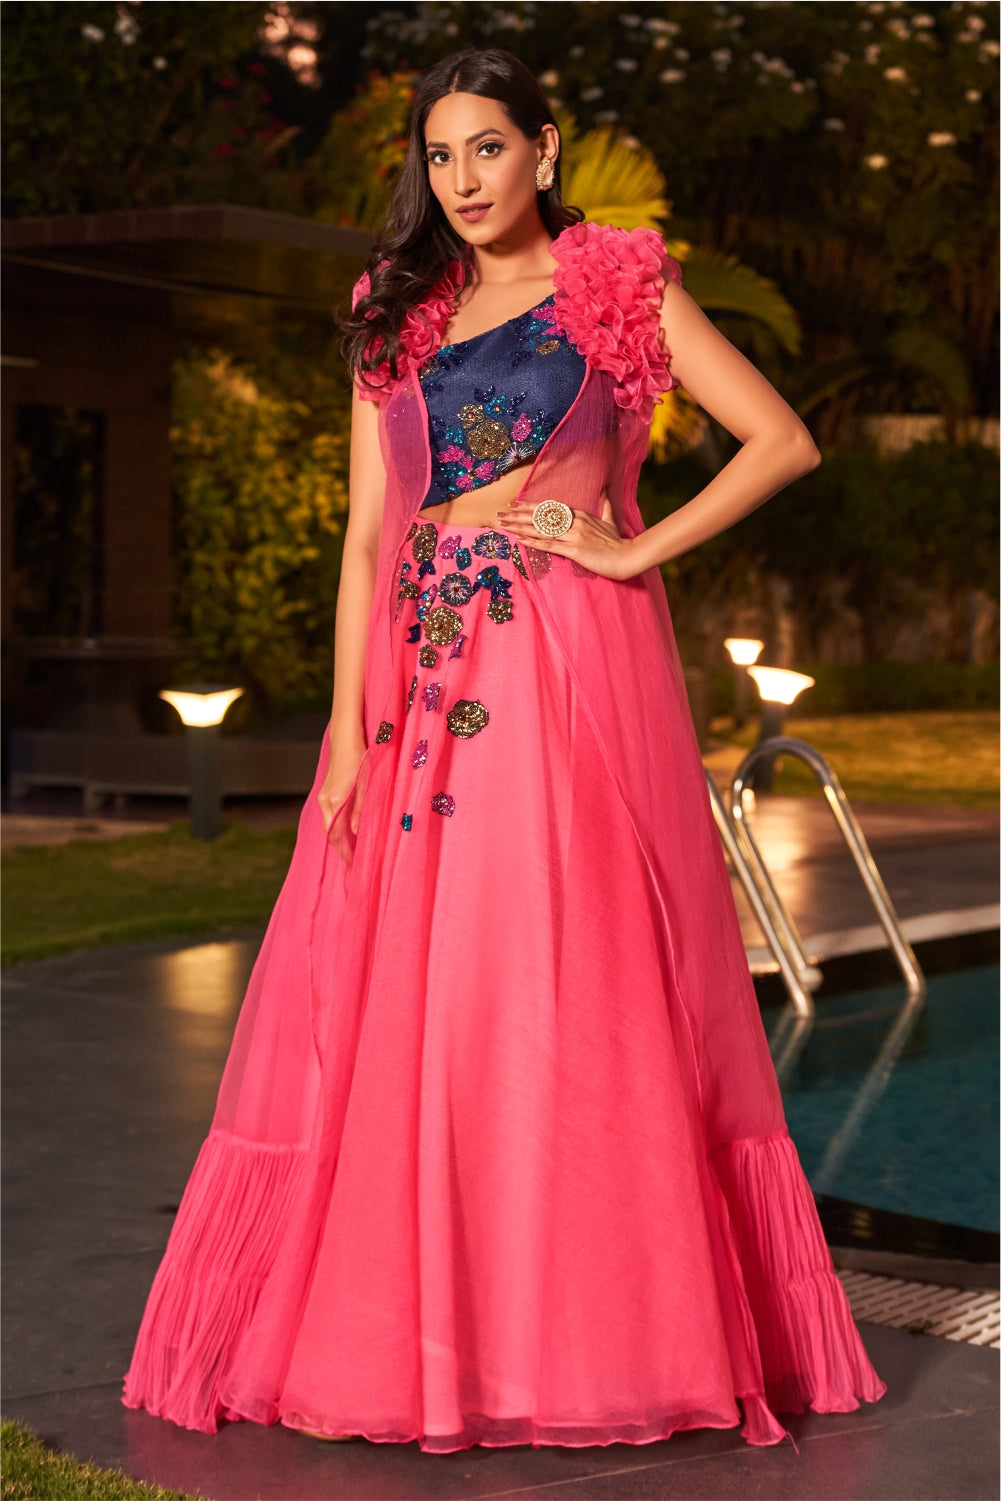 Hot Pink Lehenga With One Shoulder Blouse And Sleeveless Cape With Ruffles (7962168885494)